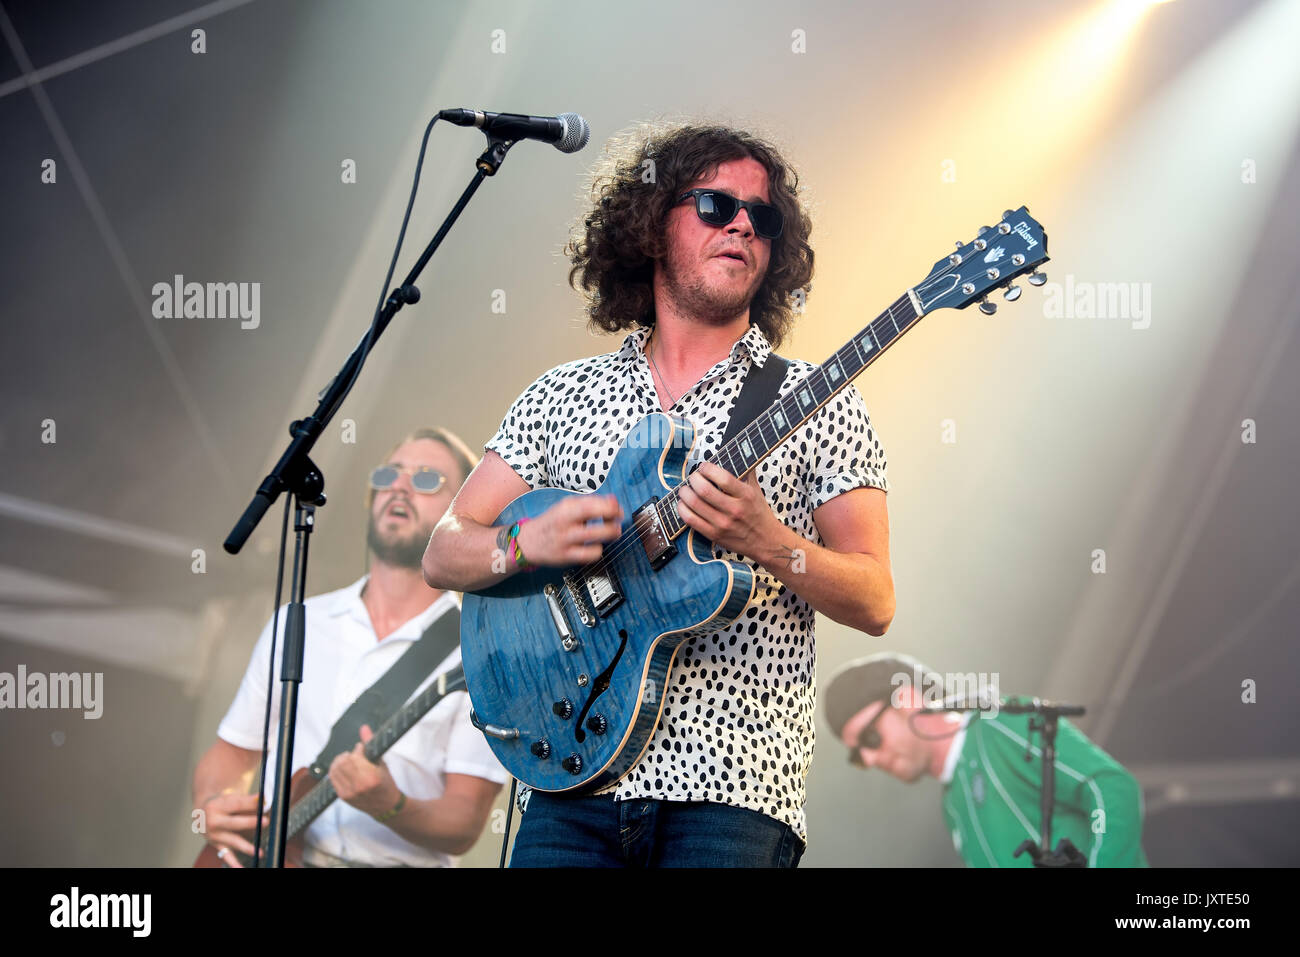 BENICASSIM, SPAIN - JUL 16: The View (music band) perform in concert at FIB Festival on July 16, 2017 in Benicassim, Spain. Stock Photo